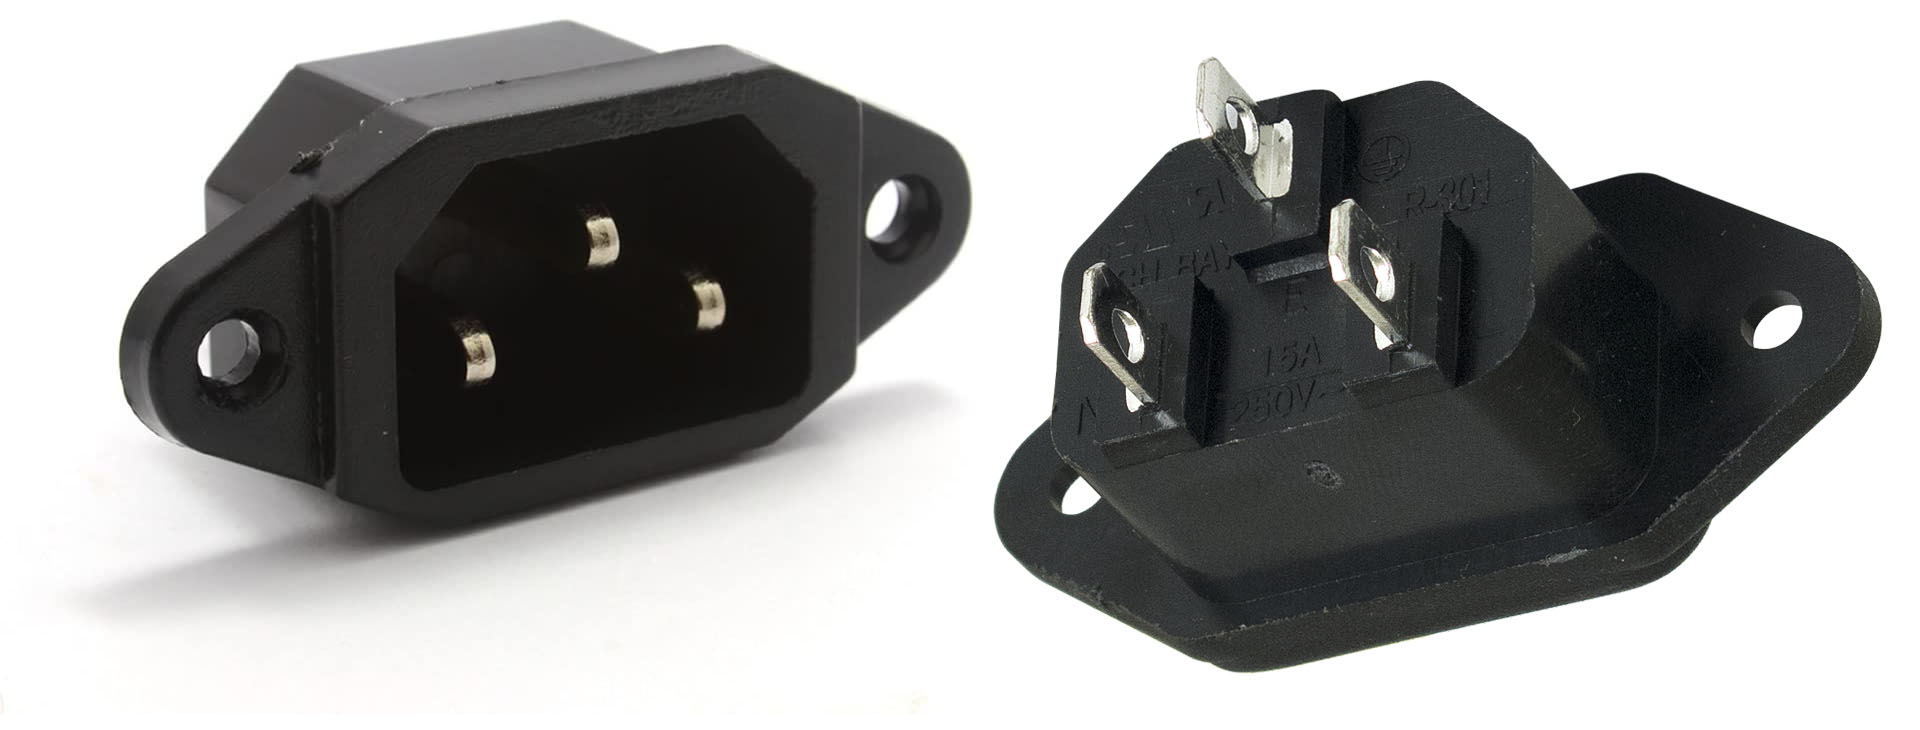 IEC C14 power inlet socket with 6.3mm spades terminals